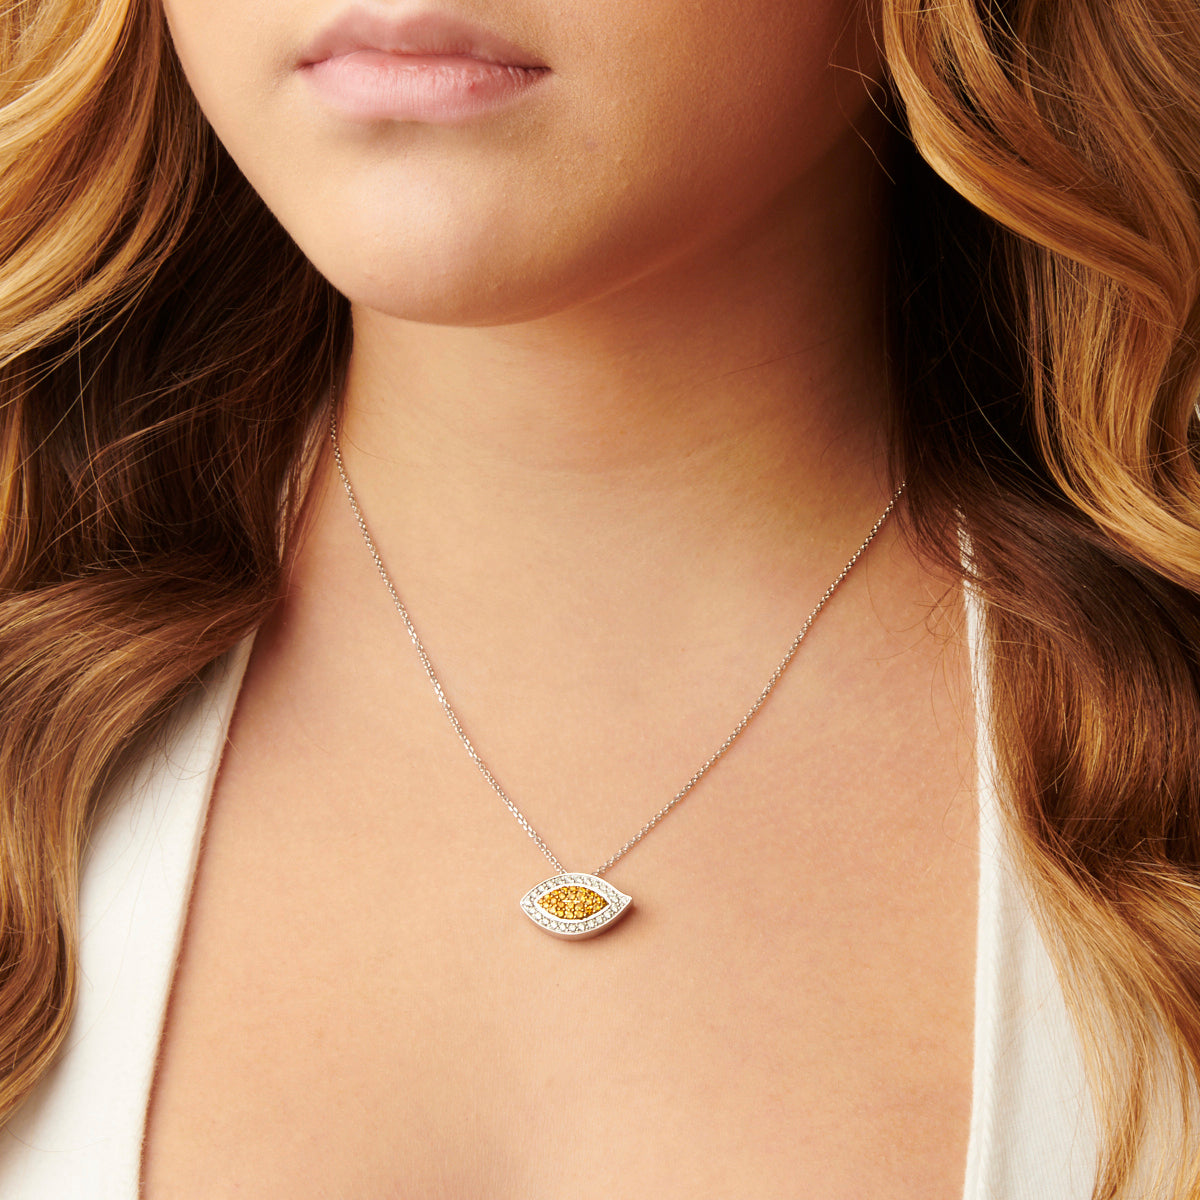 A woman elegantly wears the Evil Eye Fancy Yellow Diamond and White Diamond Pendant, its brilliant shine complementing her style.